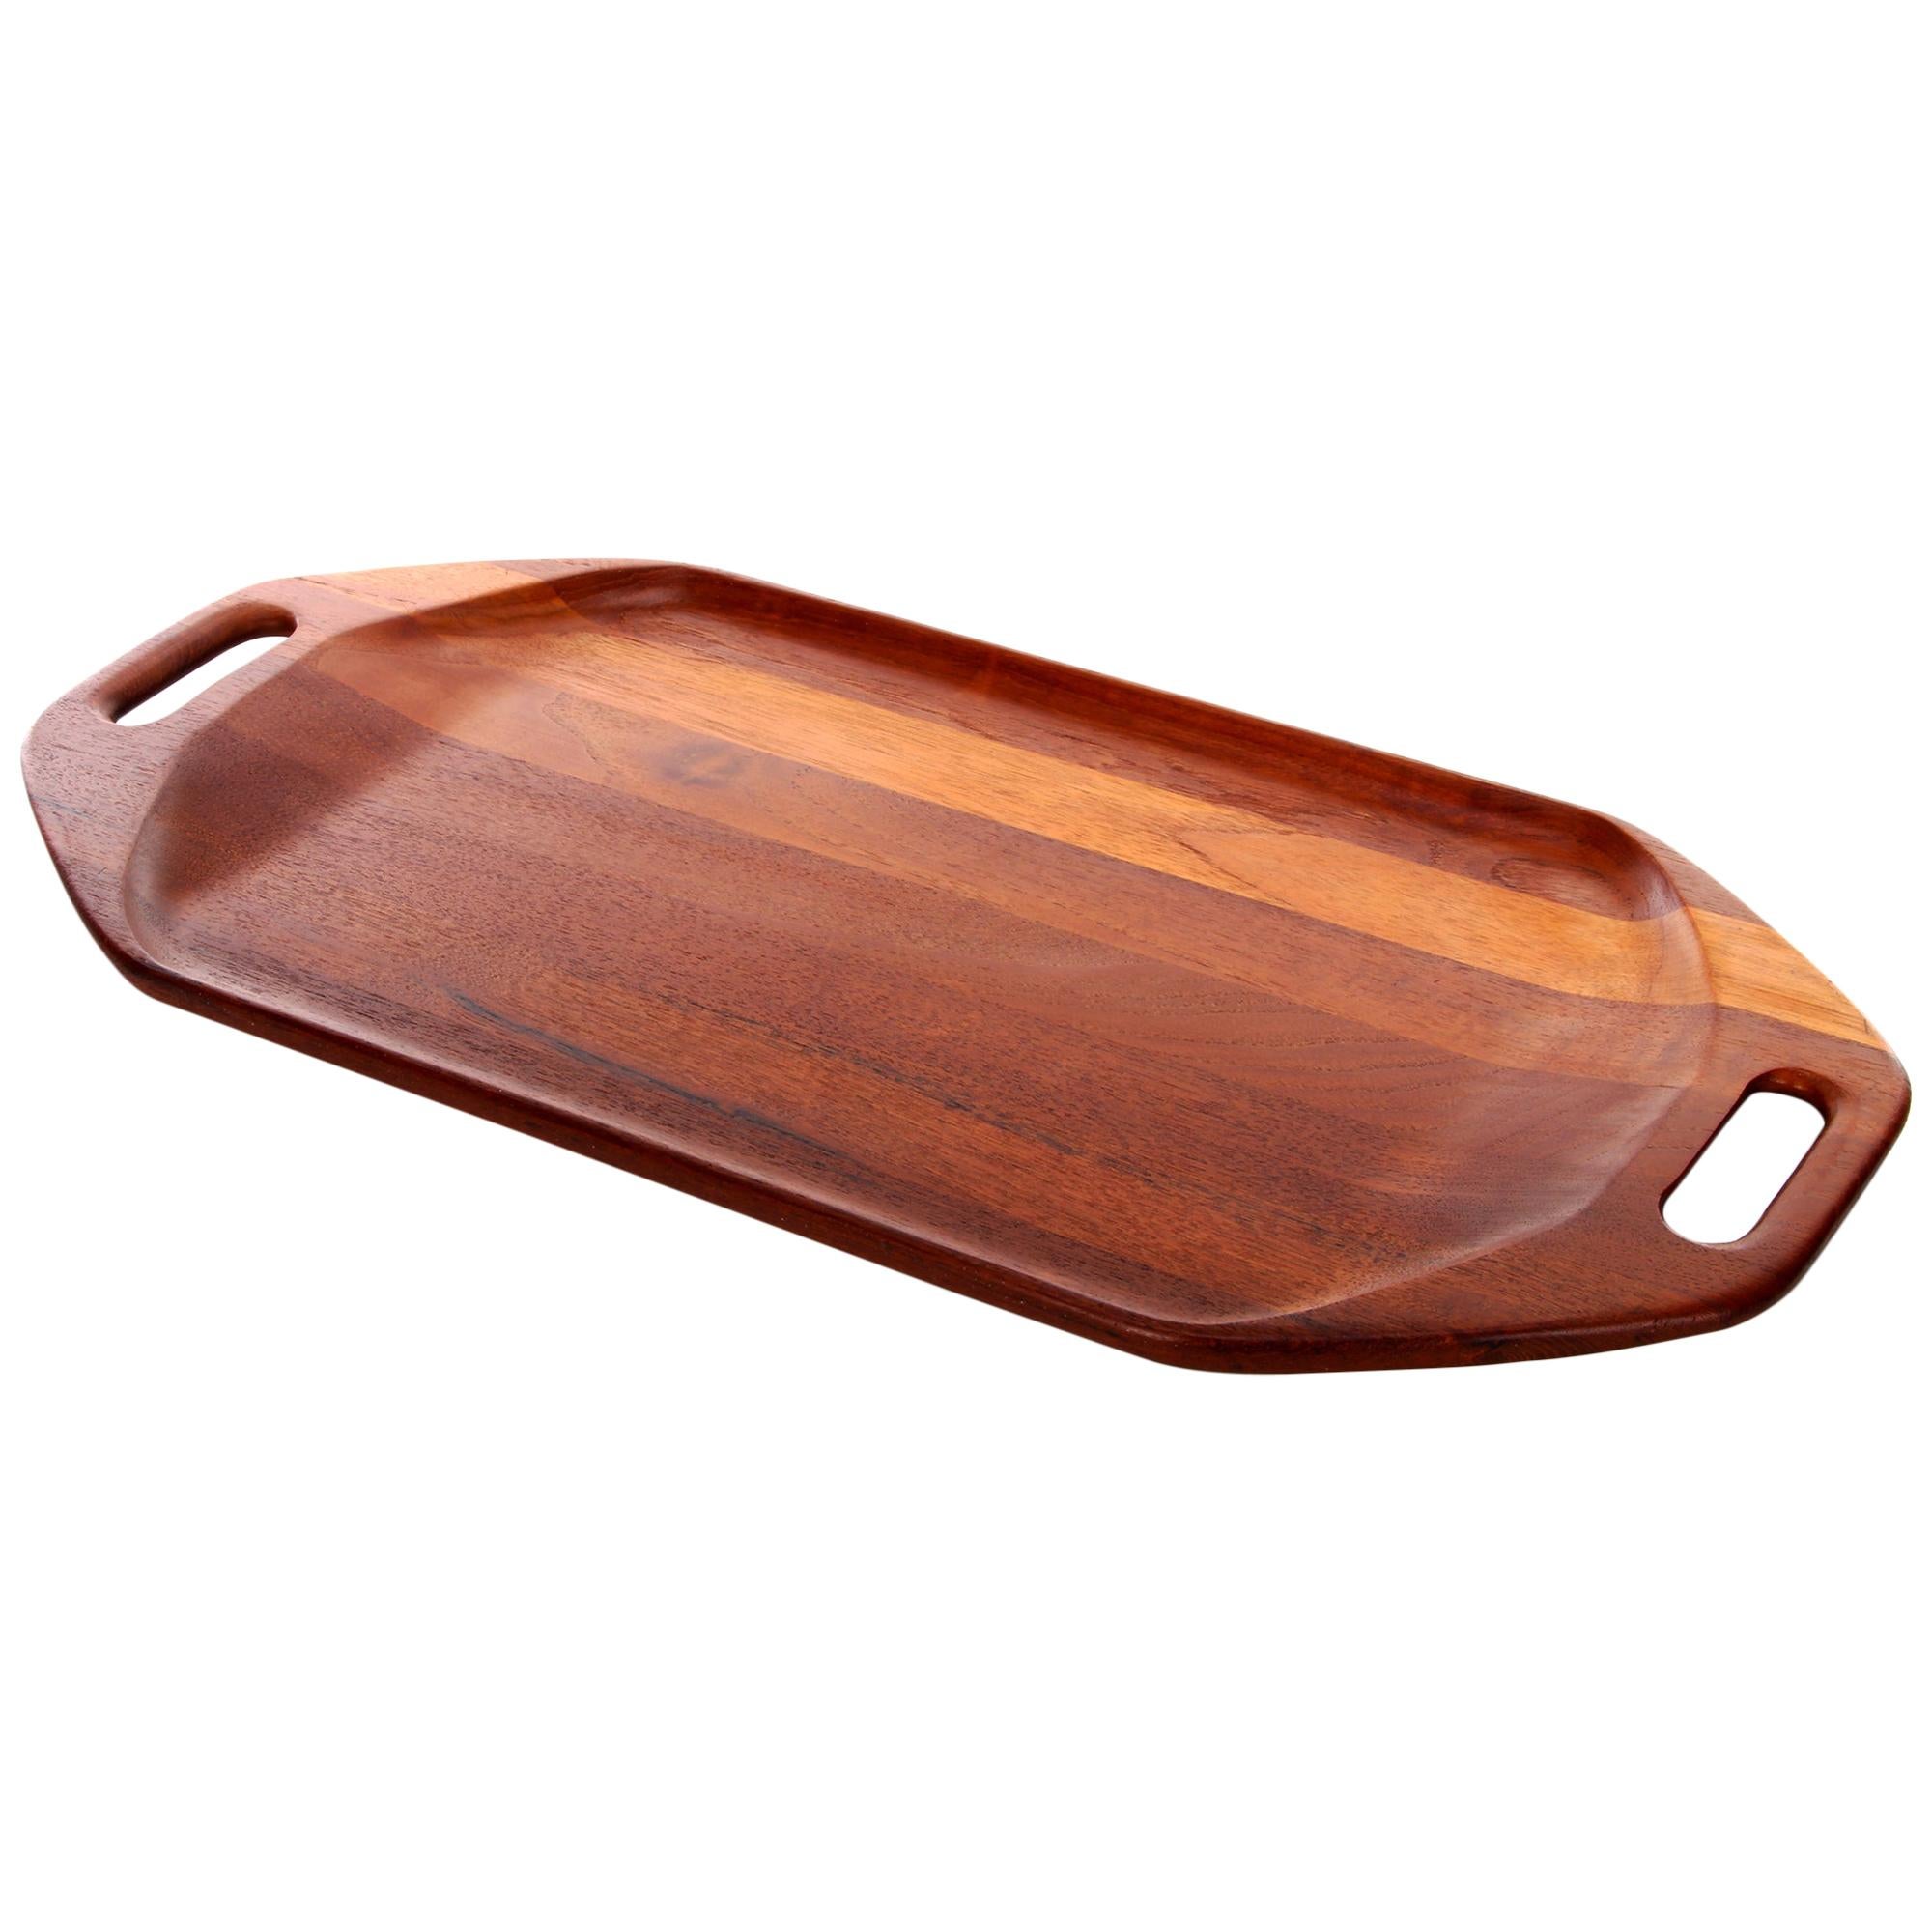 Teak Tray by Digsmed 1964, Large Danish Modern Severing Tray